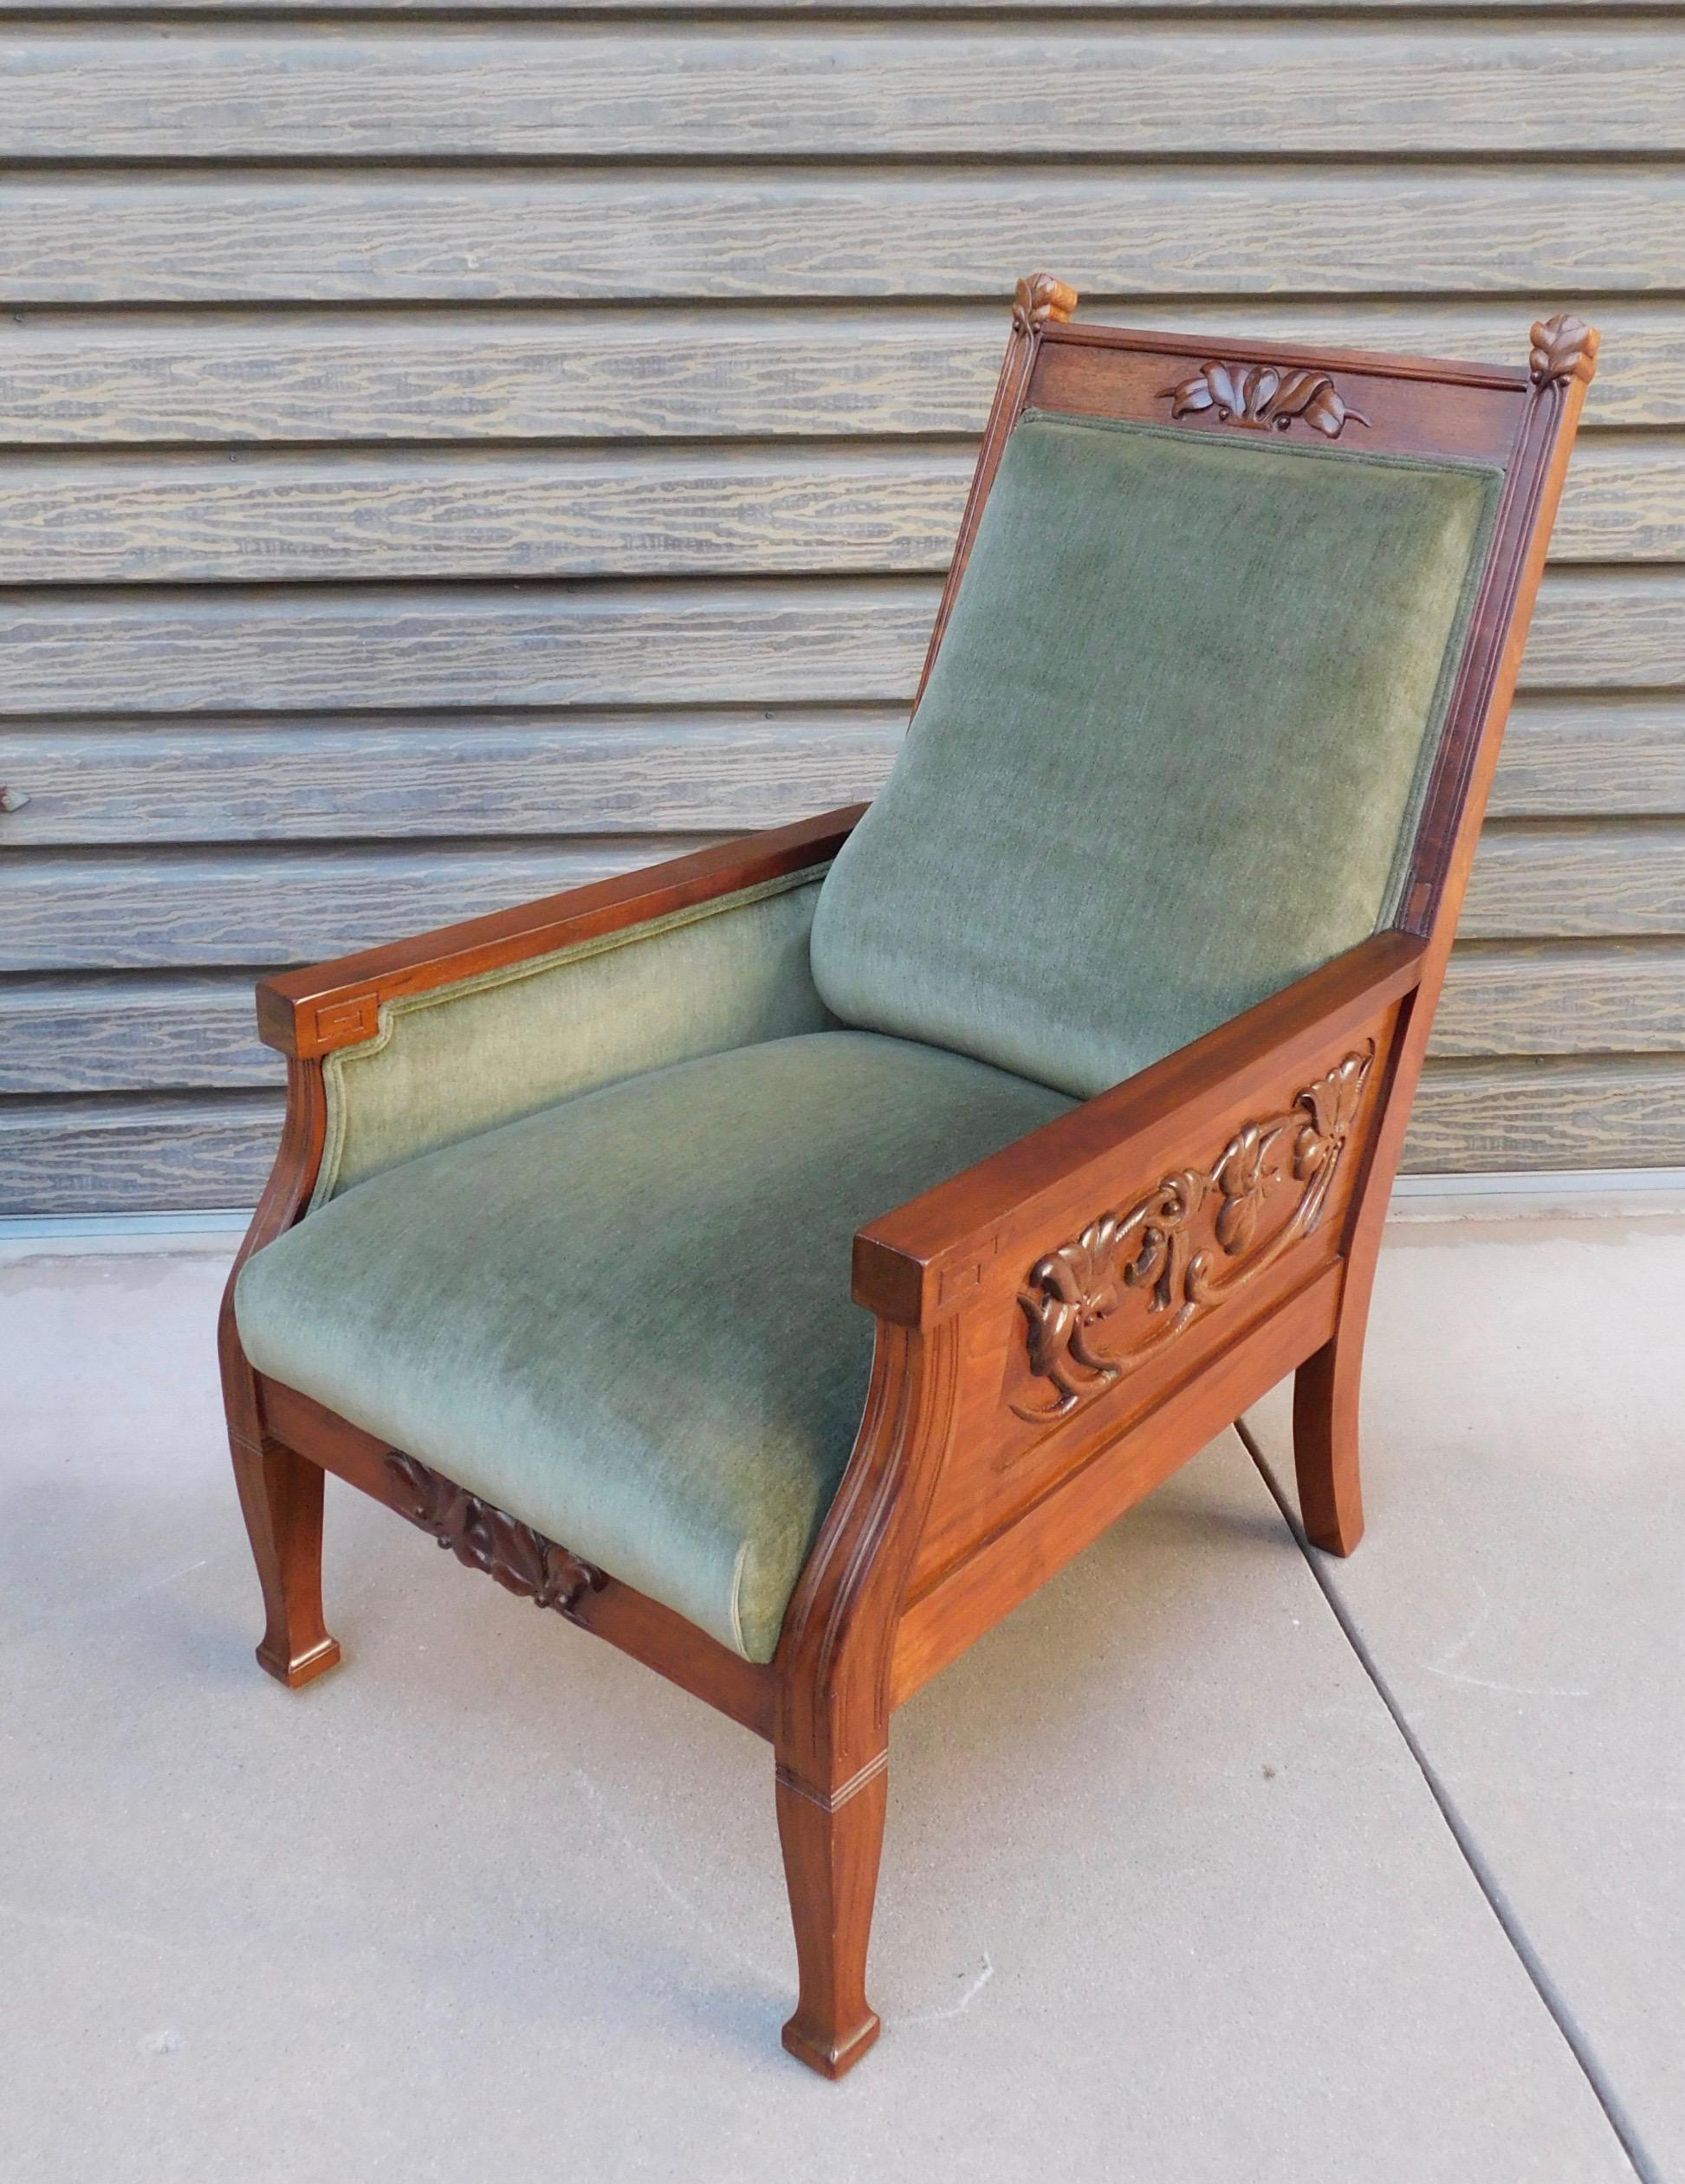 Swedish Arts & Crafts Paneled Chair with Carved Flora Motifs, circa 1900 For Sale 11